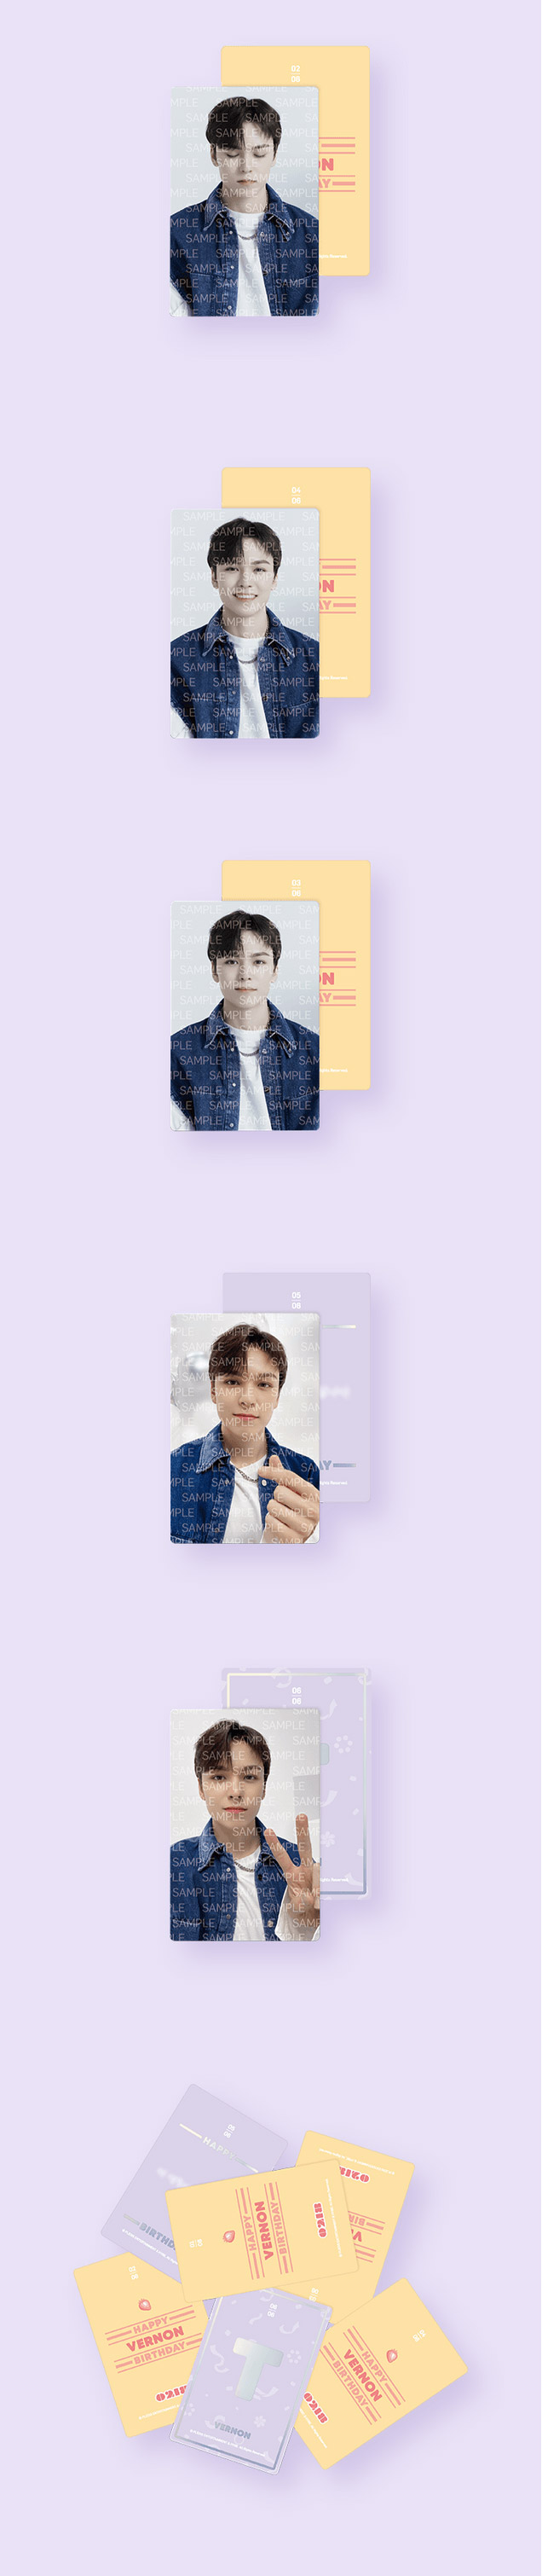 HAPPY VERNON DAY BIRTHDAY PACKAGE